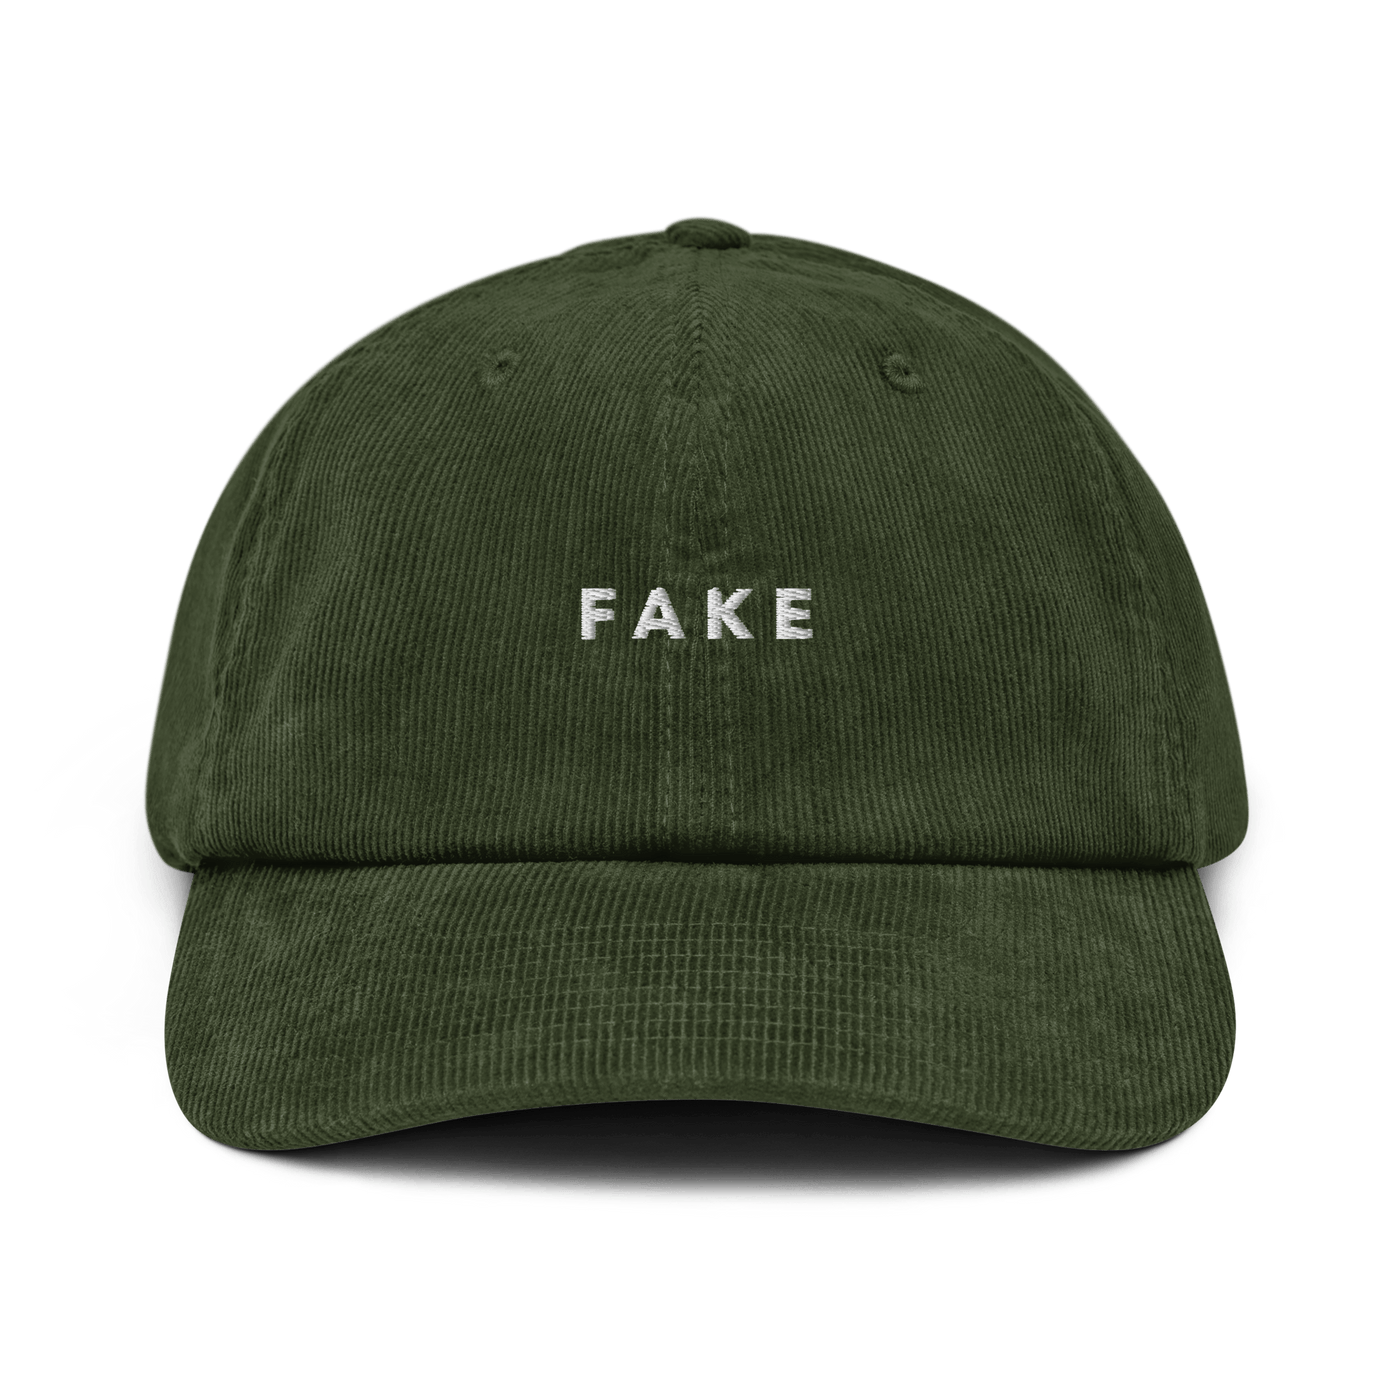 FAKE Corduroy hat - Dark Olive - - Just Another Cap Store